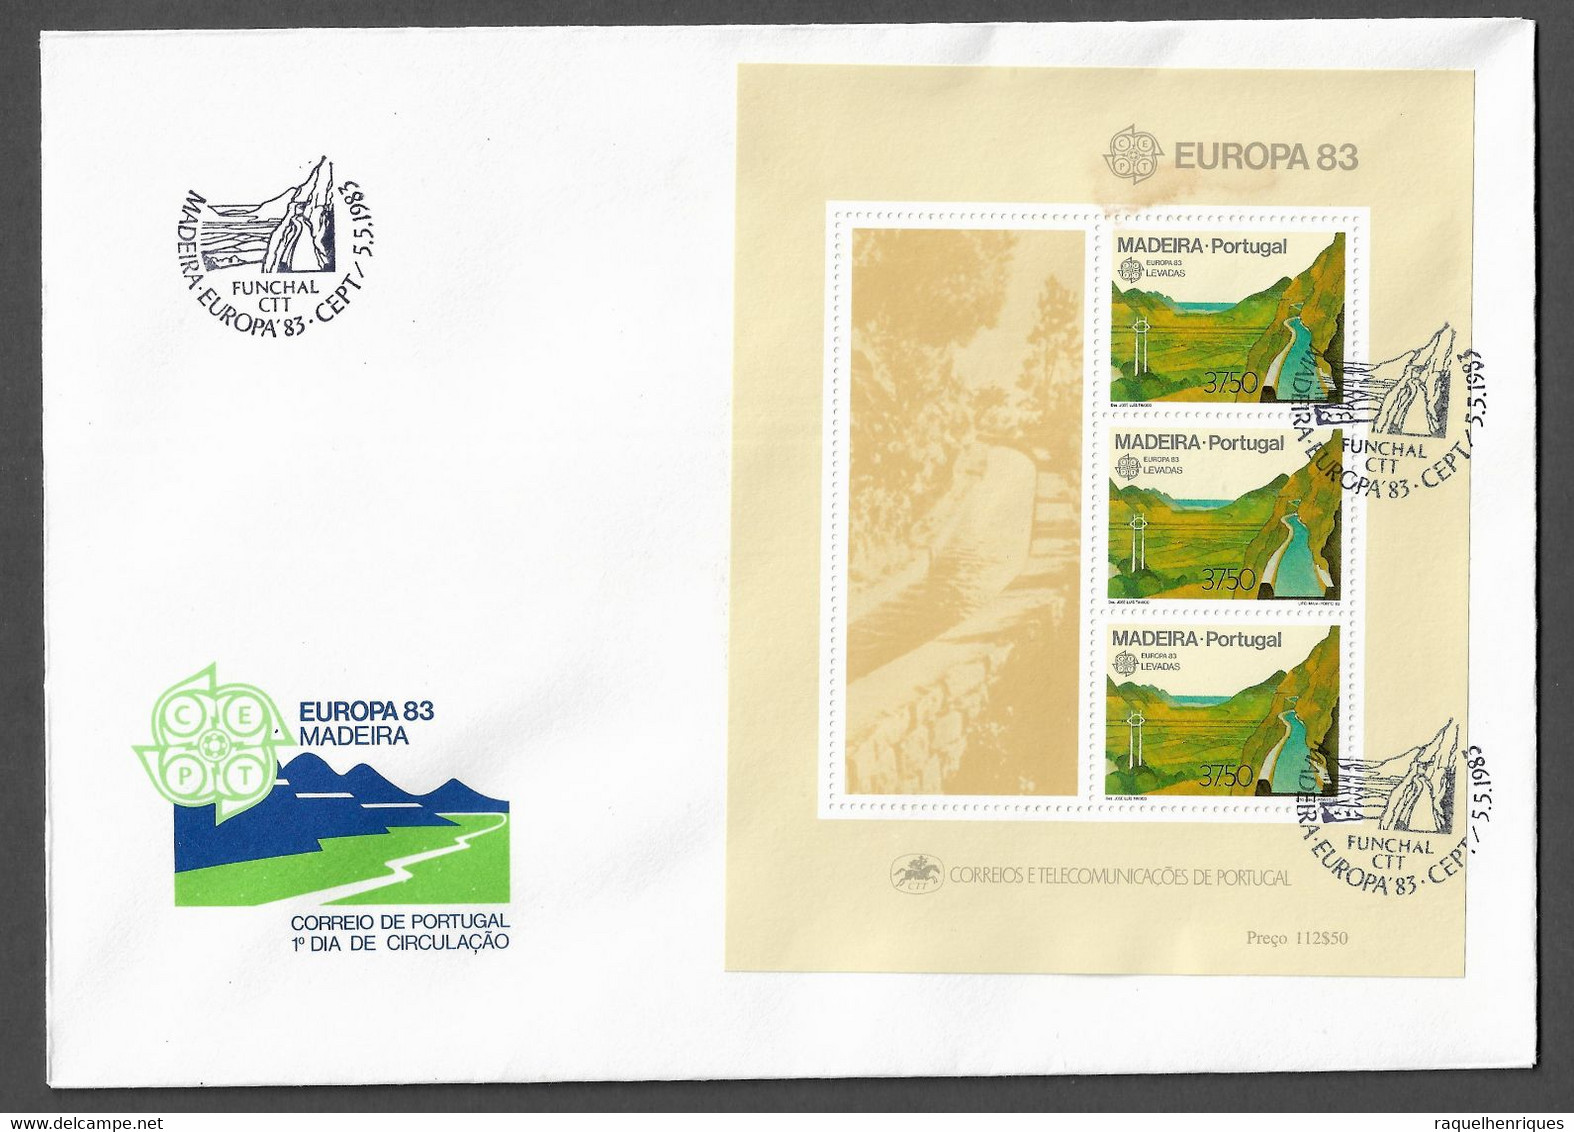 PORTUGAL FDCB - 1983 EUROPA Stamps - MADEIRA - CARIMBO FUNCHAL (FDCB#57) - FDC